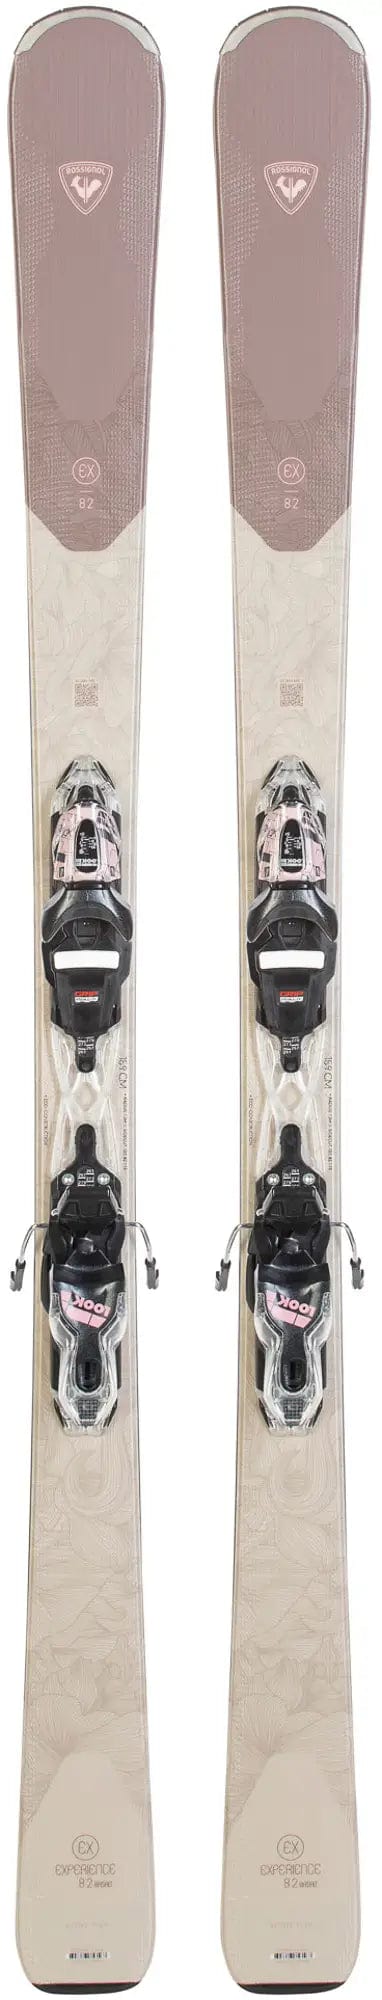 ROSSIGNOL 151 / PINK Rossignol Experience 82w Ski and Binding Package